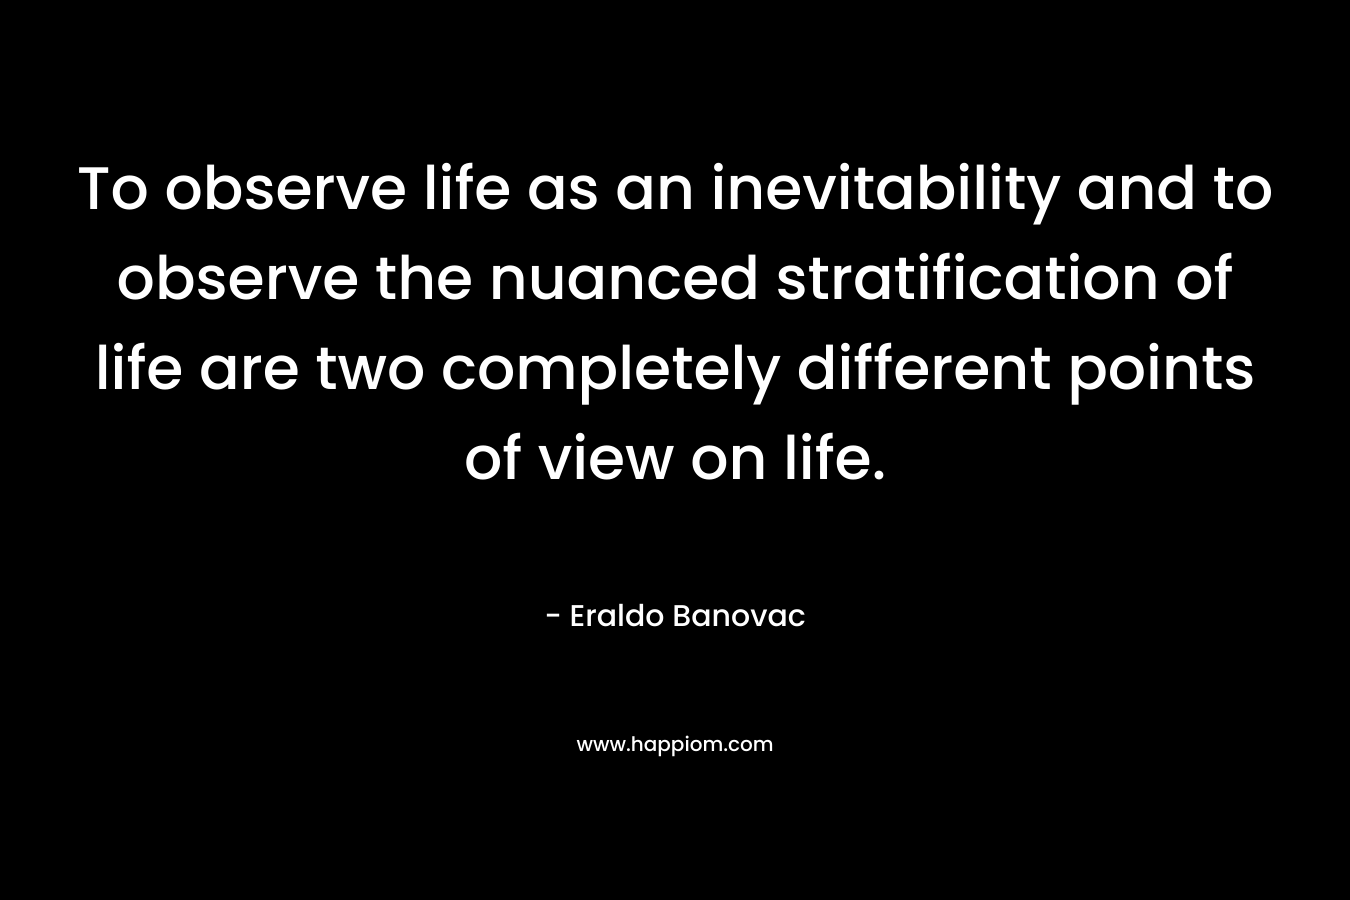 To observe life as an inevitability and to observe the nuanced stratification of life are two completely different points of view on life.